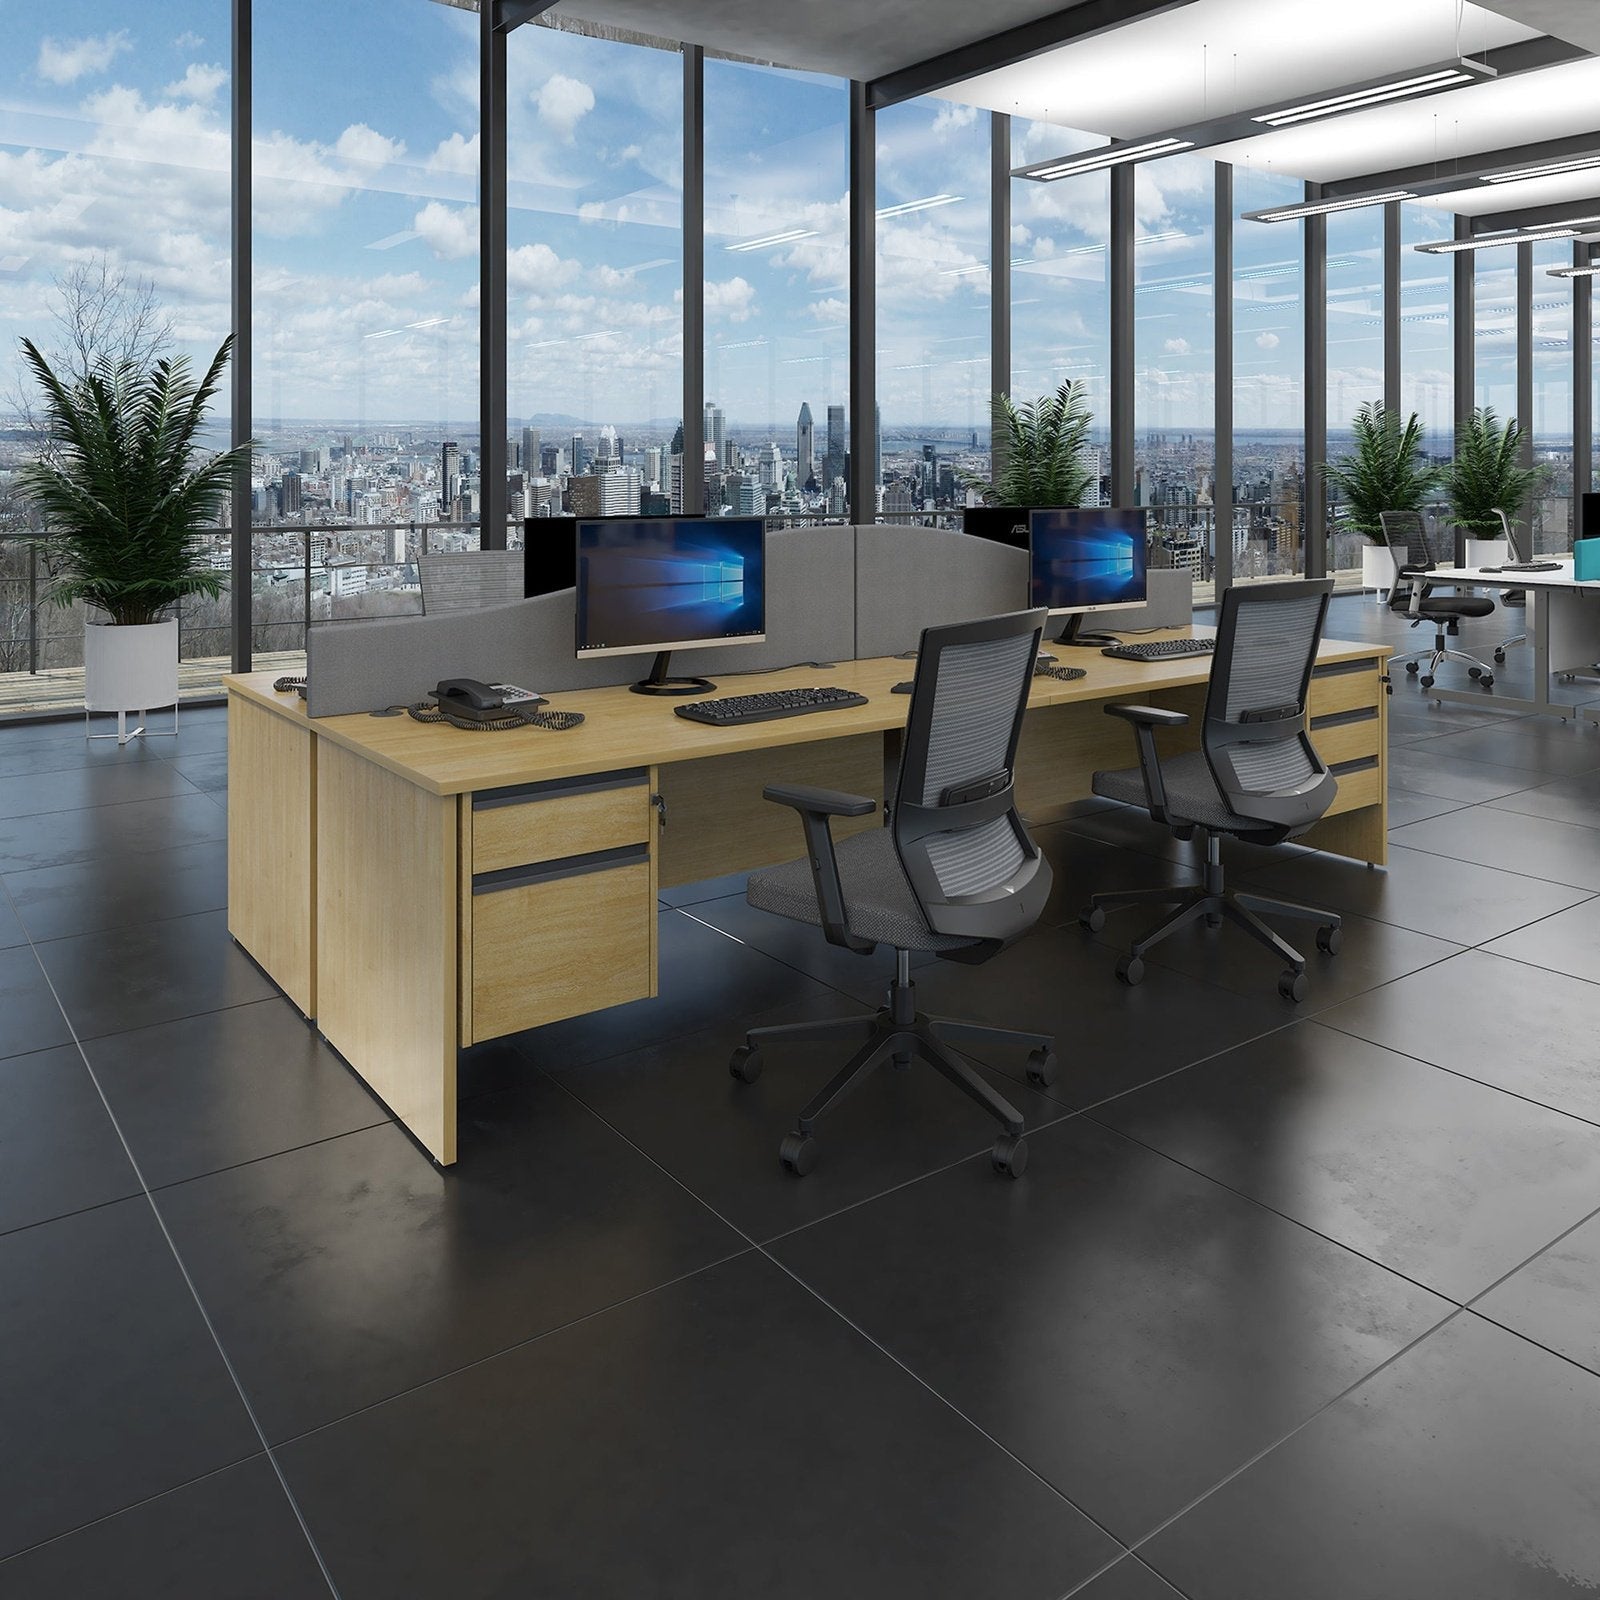 Contract fixed pedestal - Office Products Online